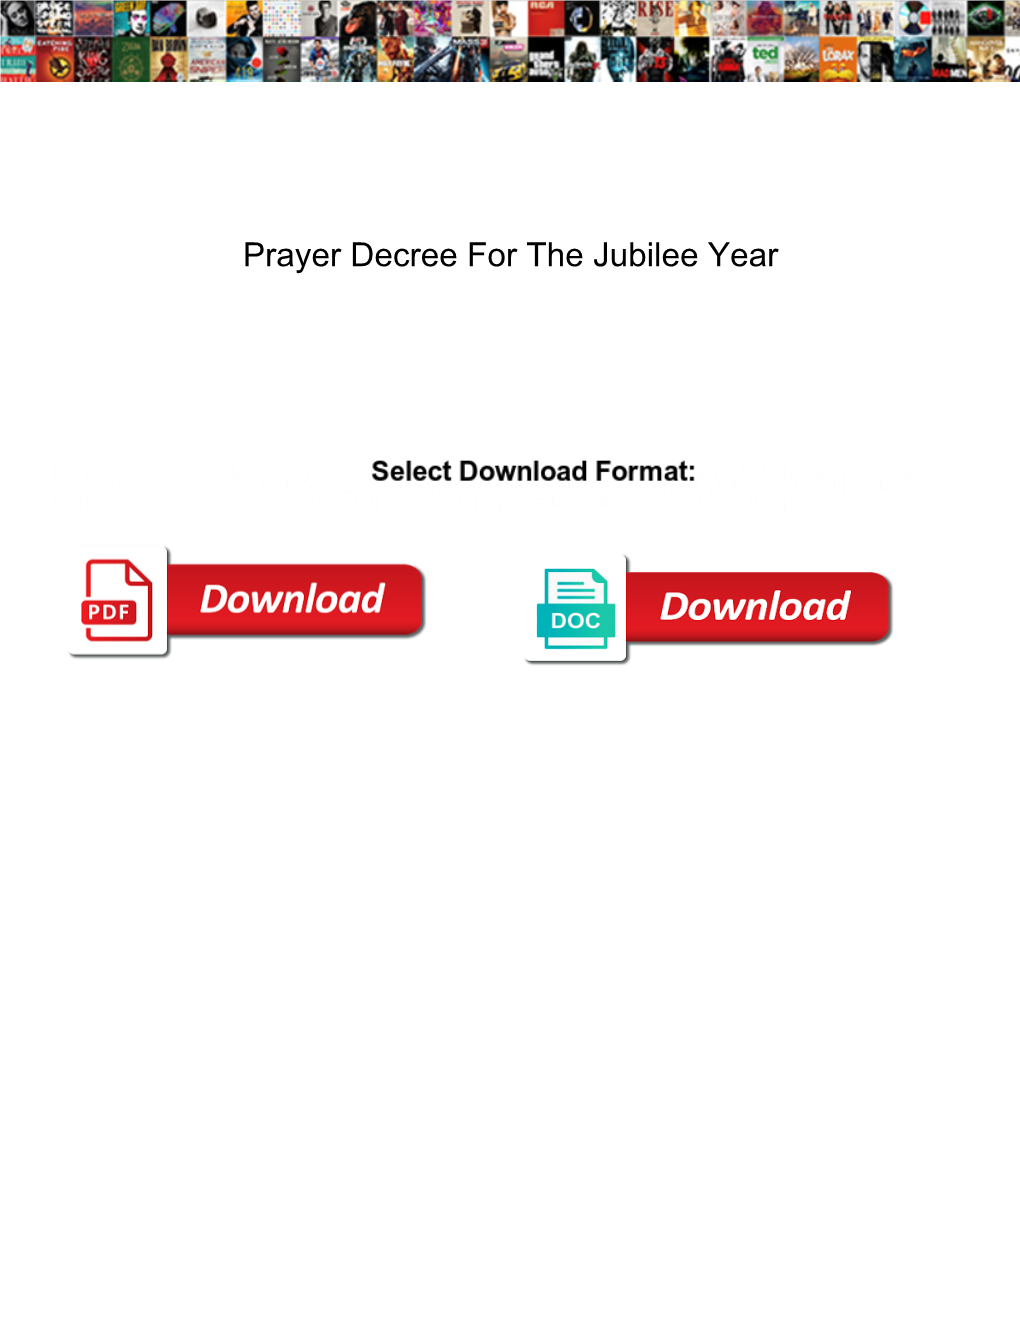 Prayer Decree for the Jubilee Year